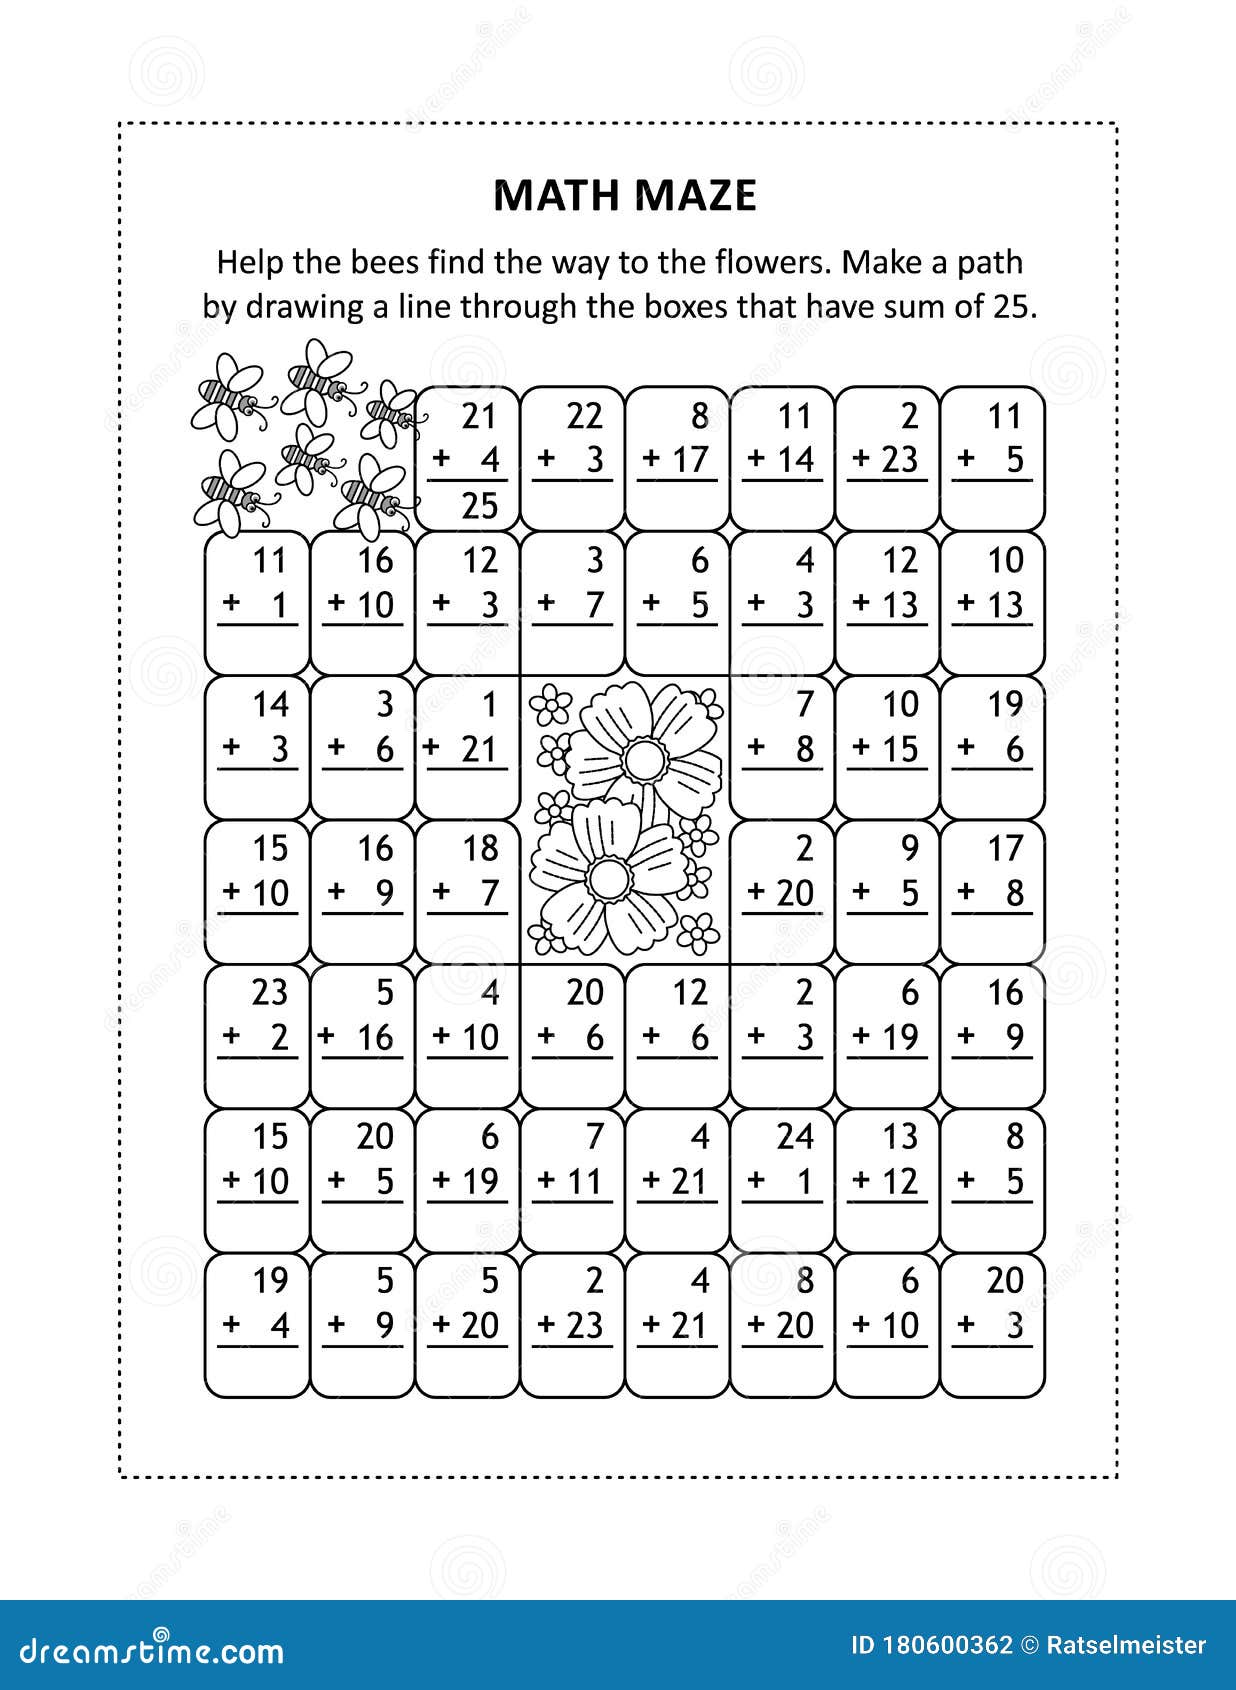 math-maze-with-addition-facts-for-numbers-up-to-25-stock-vector-illustration-of-mazes